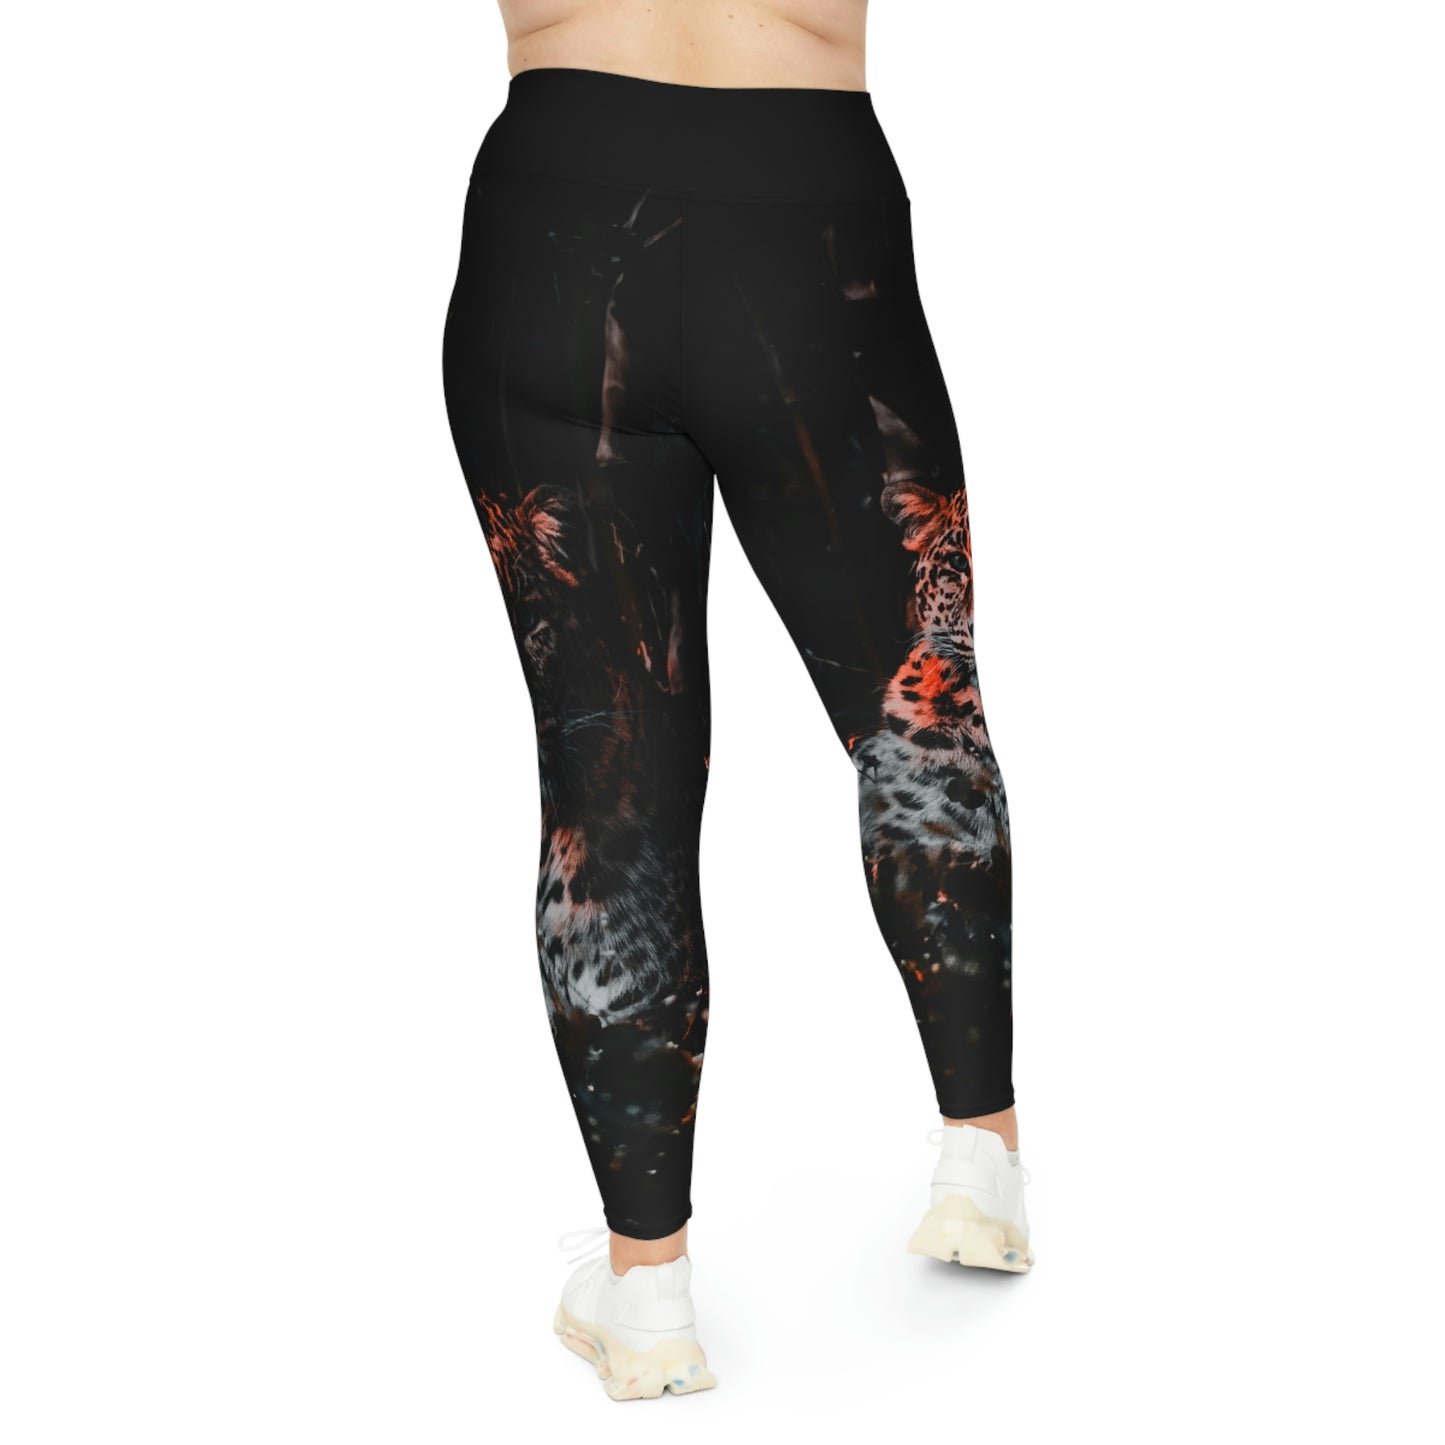 Plus Size Tiger Print Leggings, One of a Kind Gift - Workout Activewear  for Wife Fitness, Best Friend, mom and me tights Christmas Gift